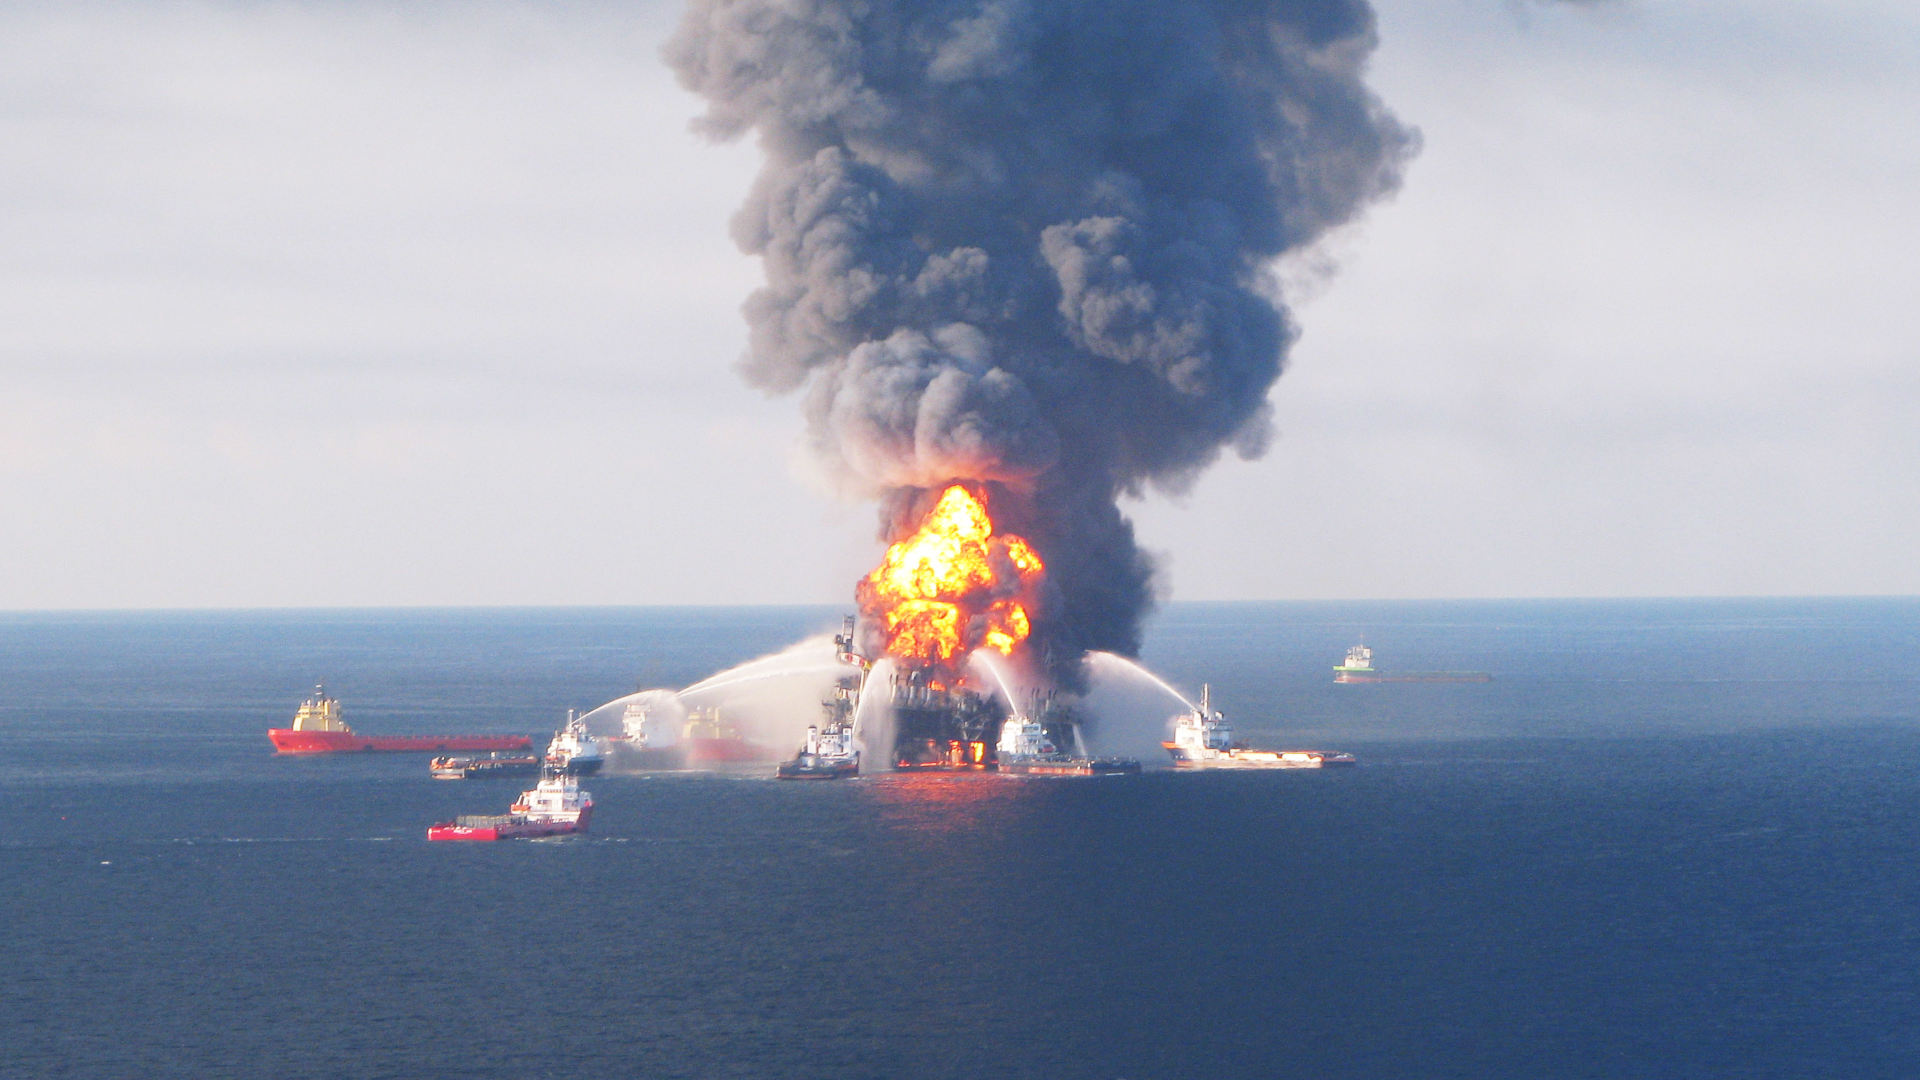 On April 21, 2010, crews battle a fire at the offshore oil rig Deepwater Horizon in the Gulf of Mexico.